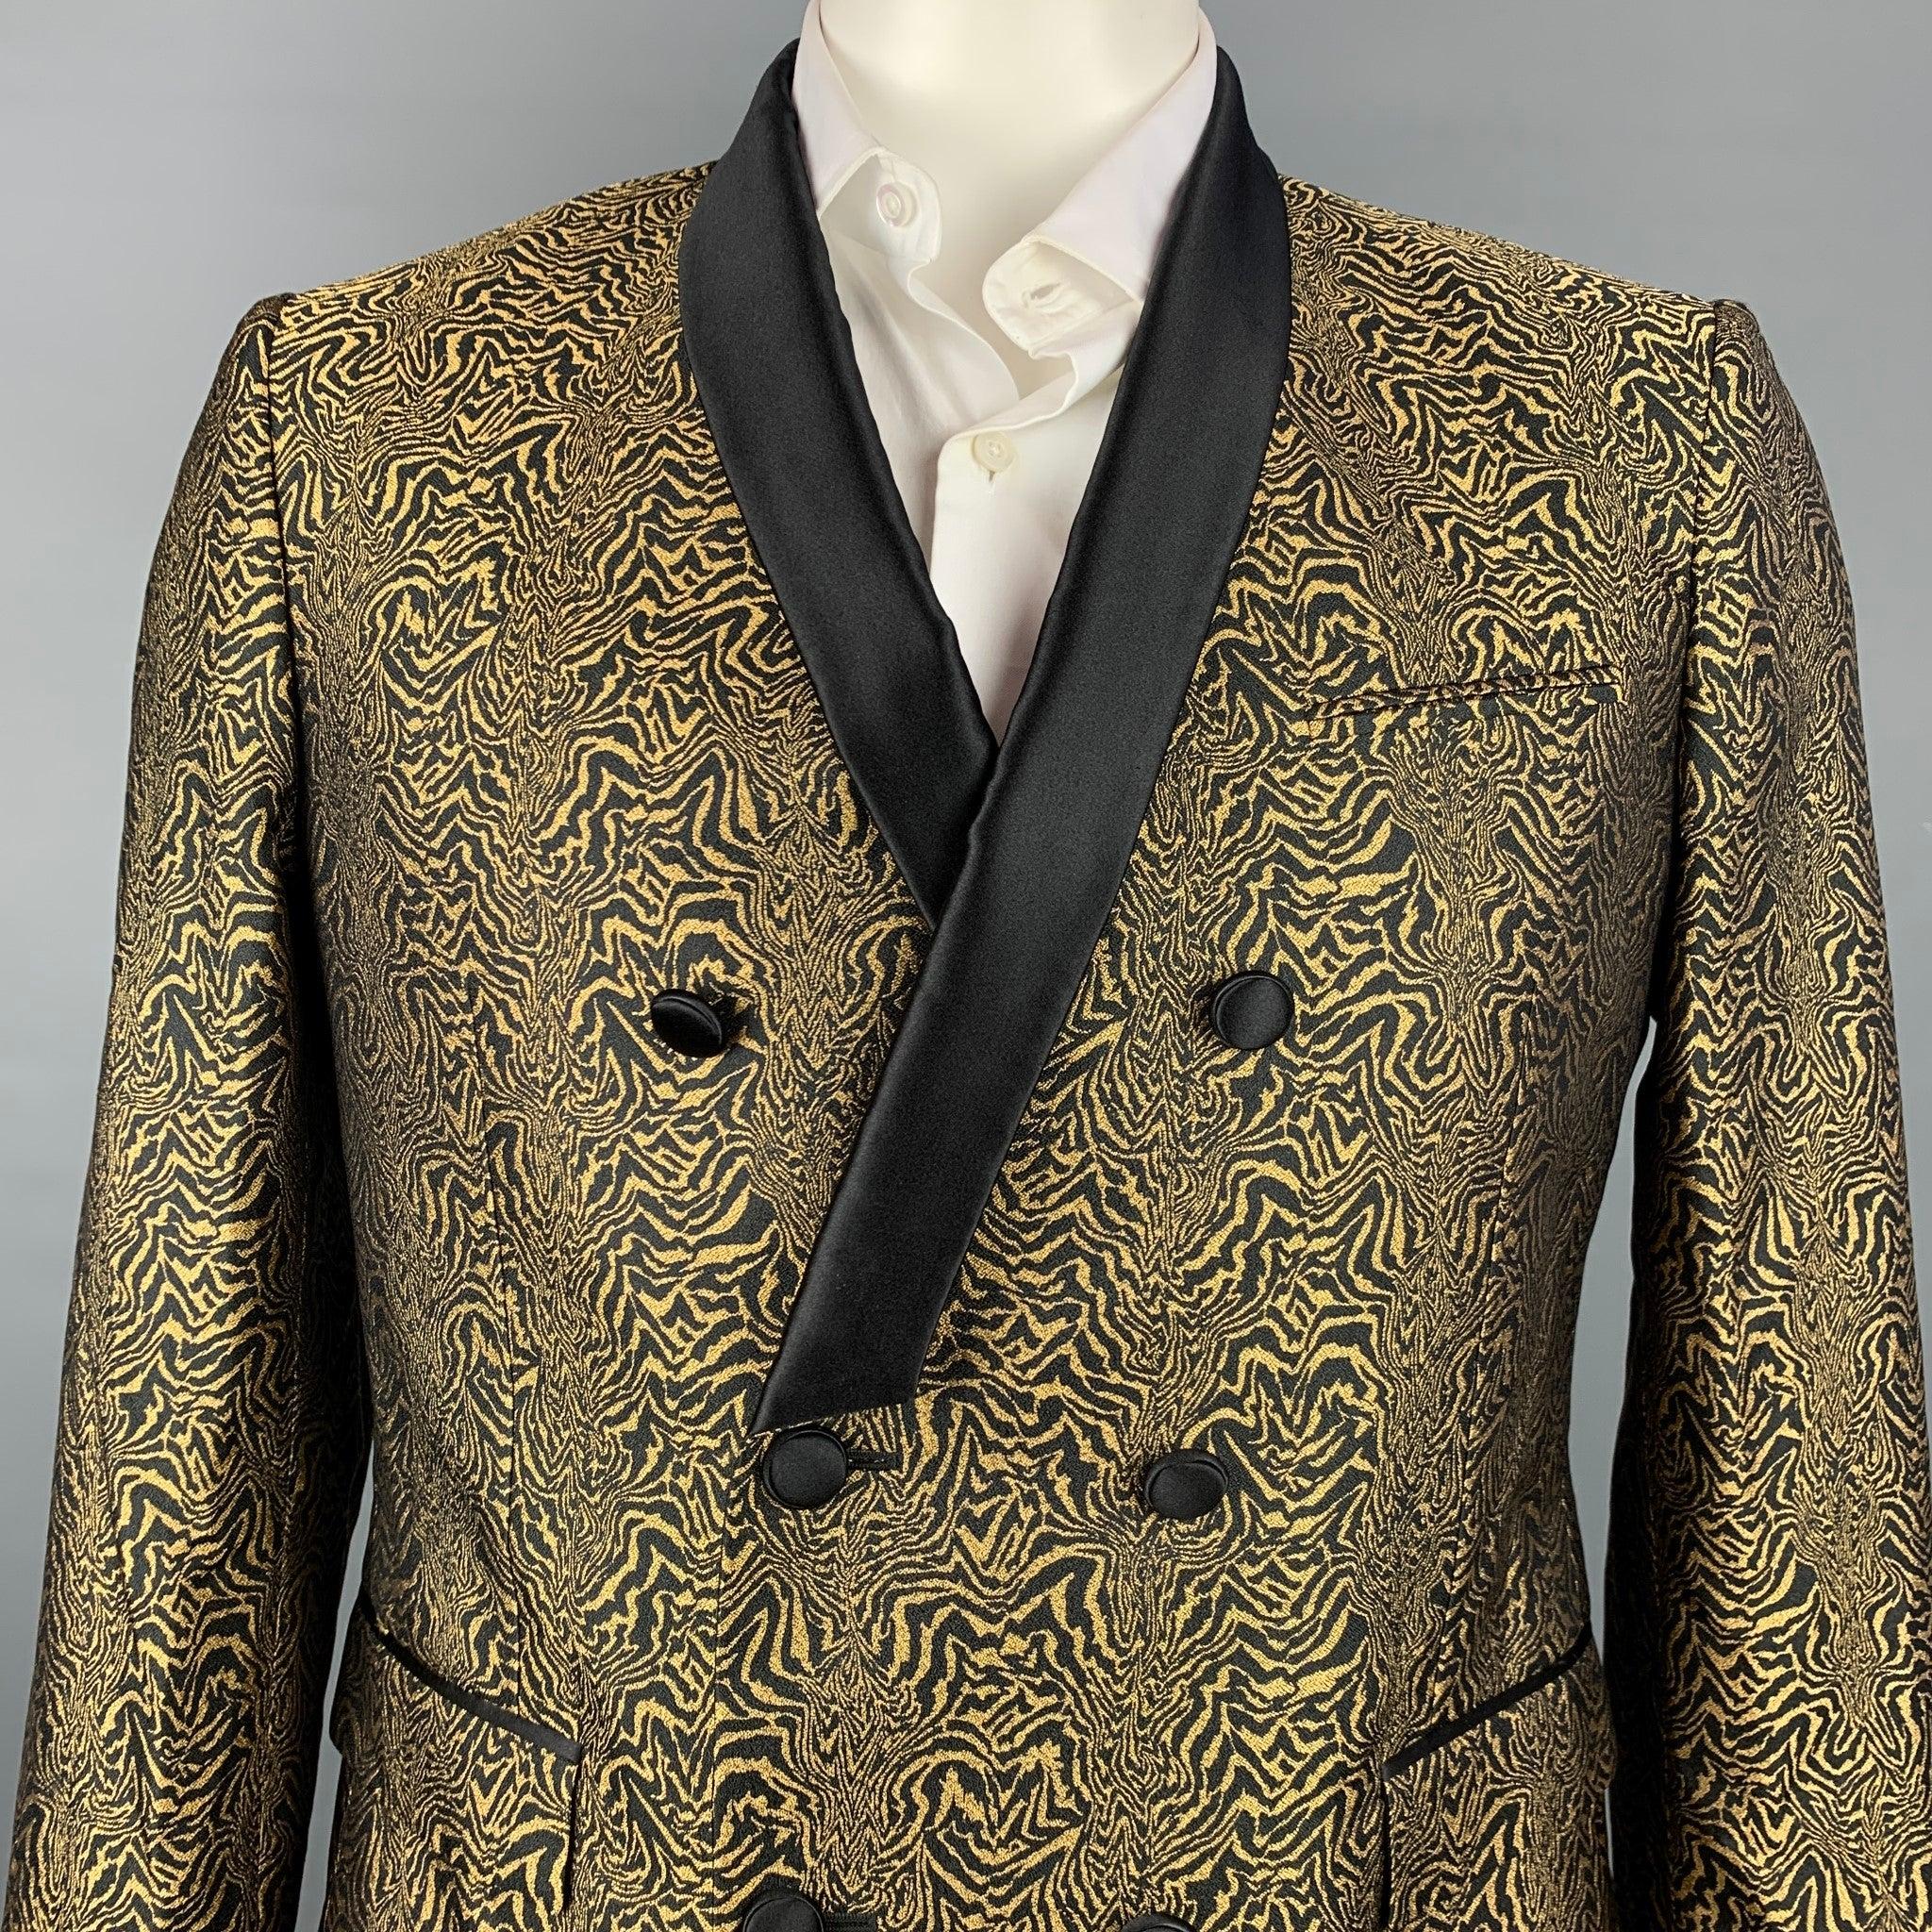 ROBERTO CAVALLI sport coat comes in a black & gold jacquard silk with a full liner featuring a shawl collar, flap pockets, and a double breasted closure. Made in Italy. New With Tags.  

Marked:   IT 54 

Measurements: 
 
Shoulder: 18 inches  Chest: